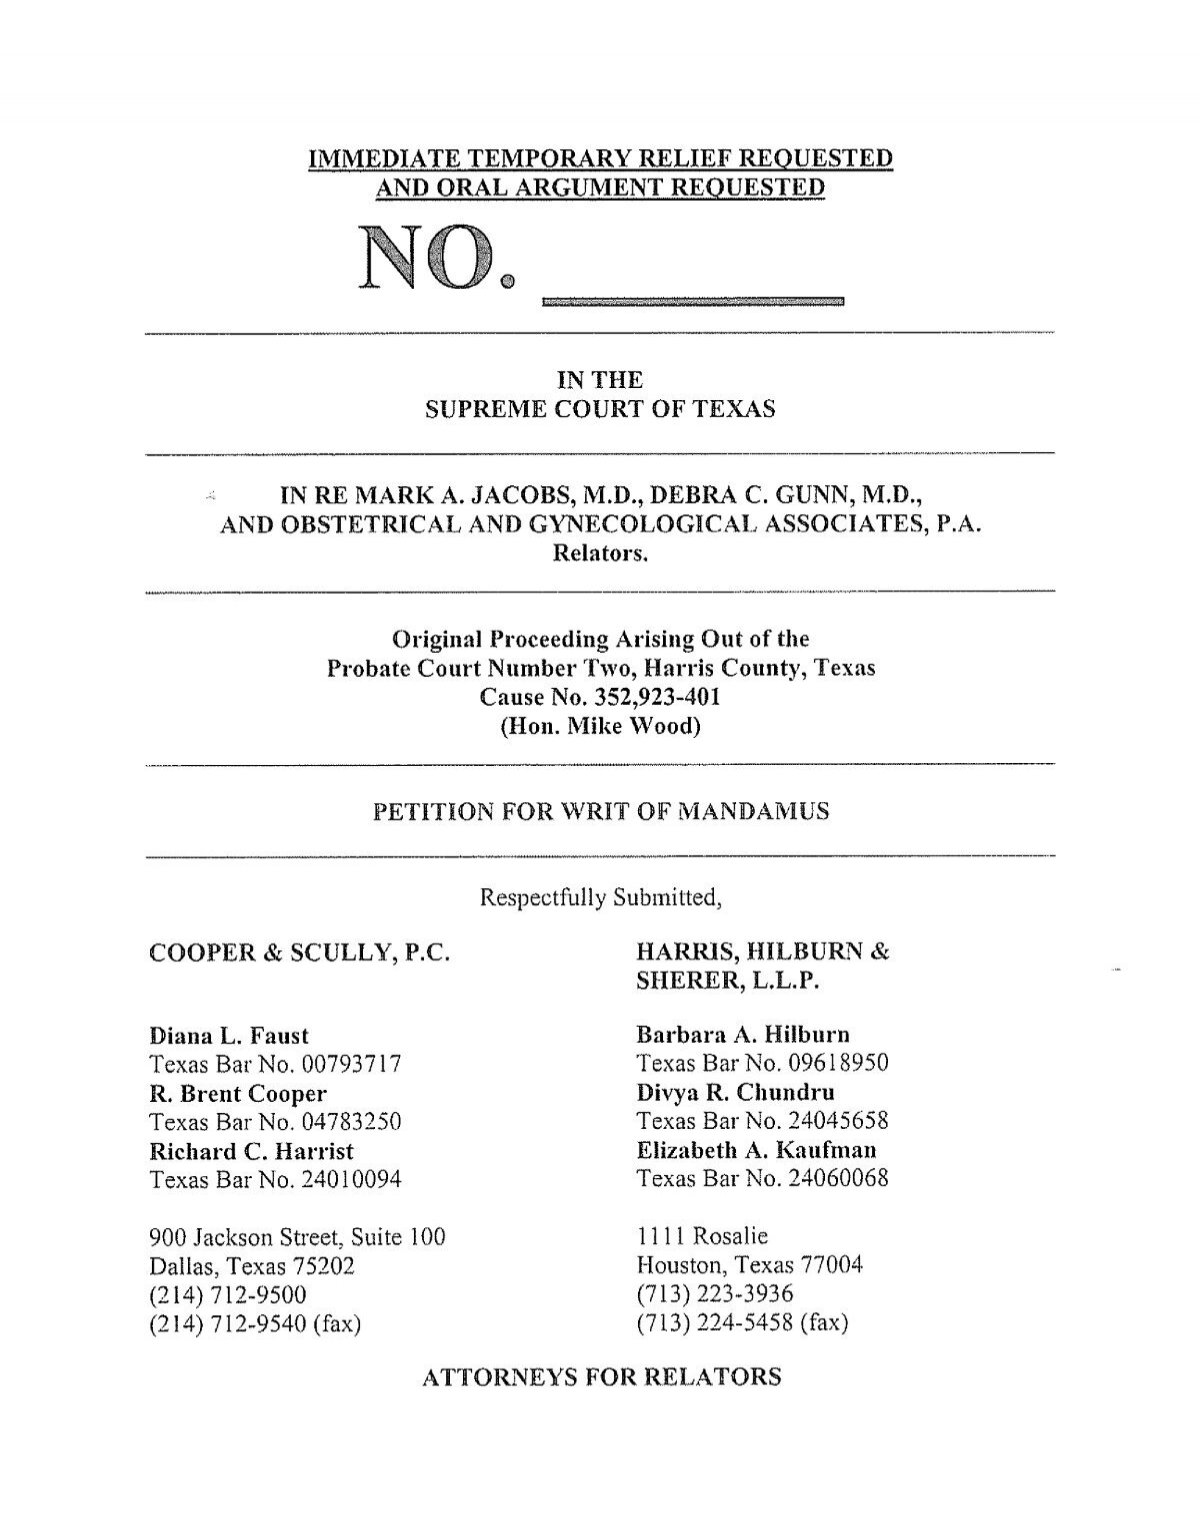 Petition for Writ of Mandamus - Filed - Supreme Court of Texas